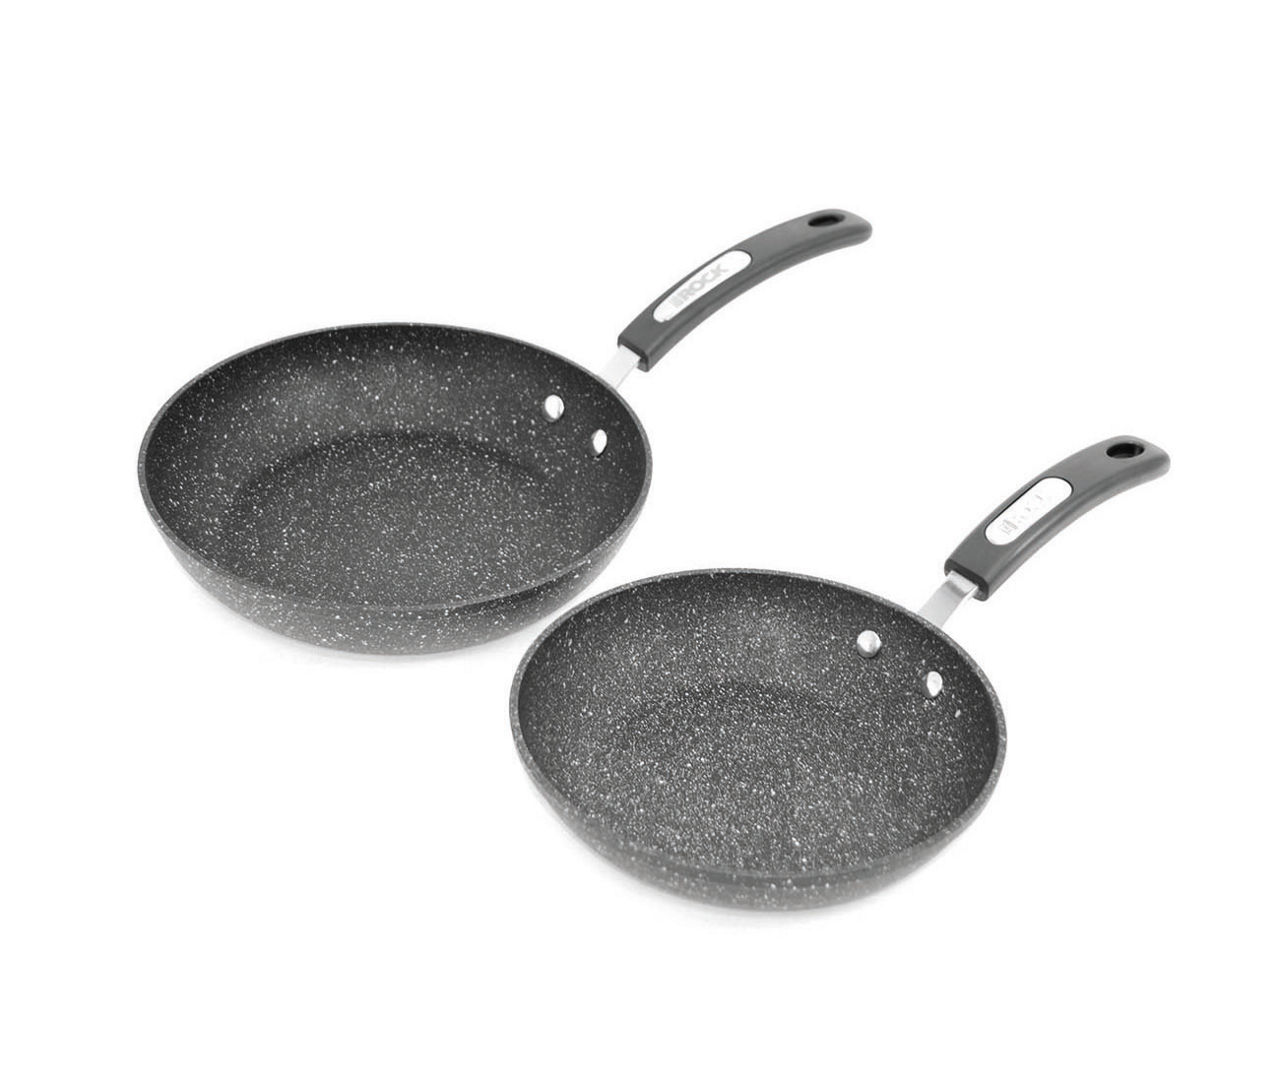 The Rock Plus Non-Stick Multi Pan 10 in Extra-Thick Forged Alu